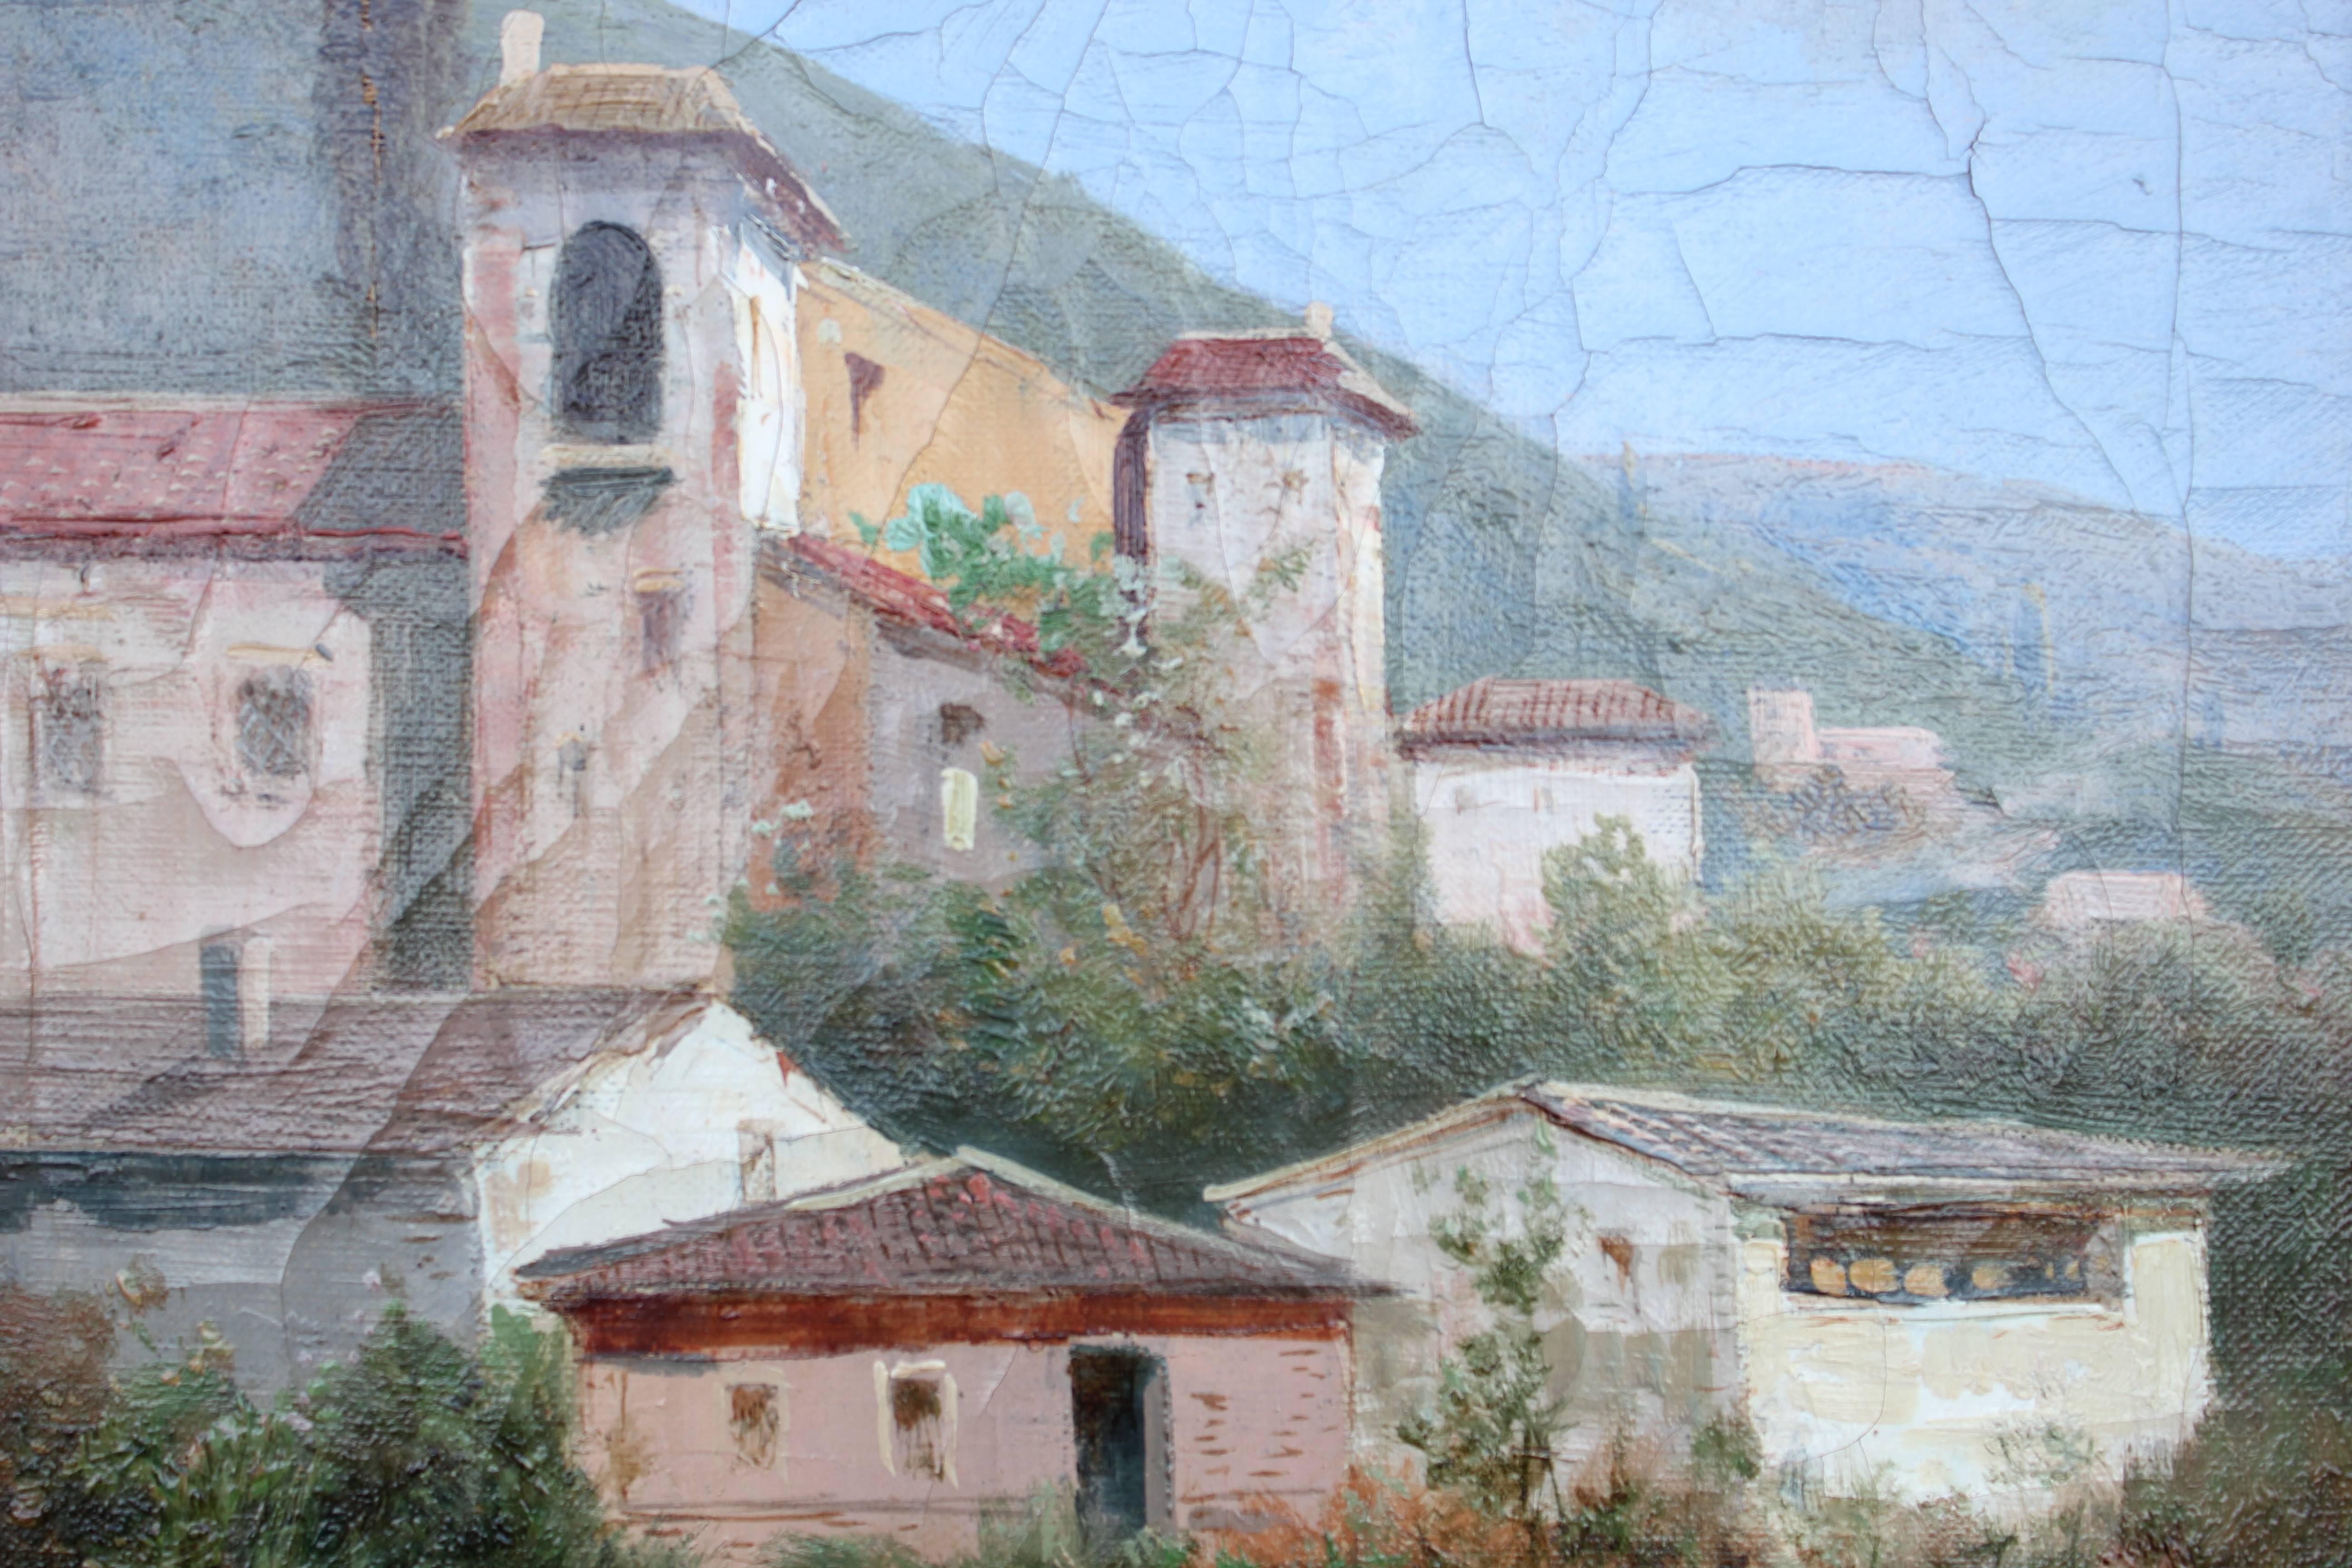 South American or Central American townscape with hills in the background and a figure walking along a street. The work has a Hertz Art Gallery stamp on the back of the framed canvas. It is framed in a decorative gold frame. The painting is signed